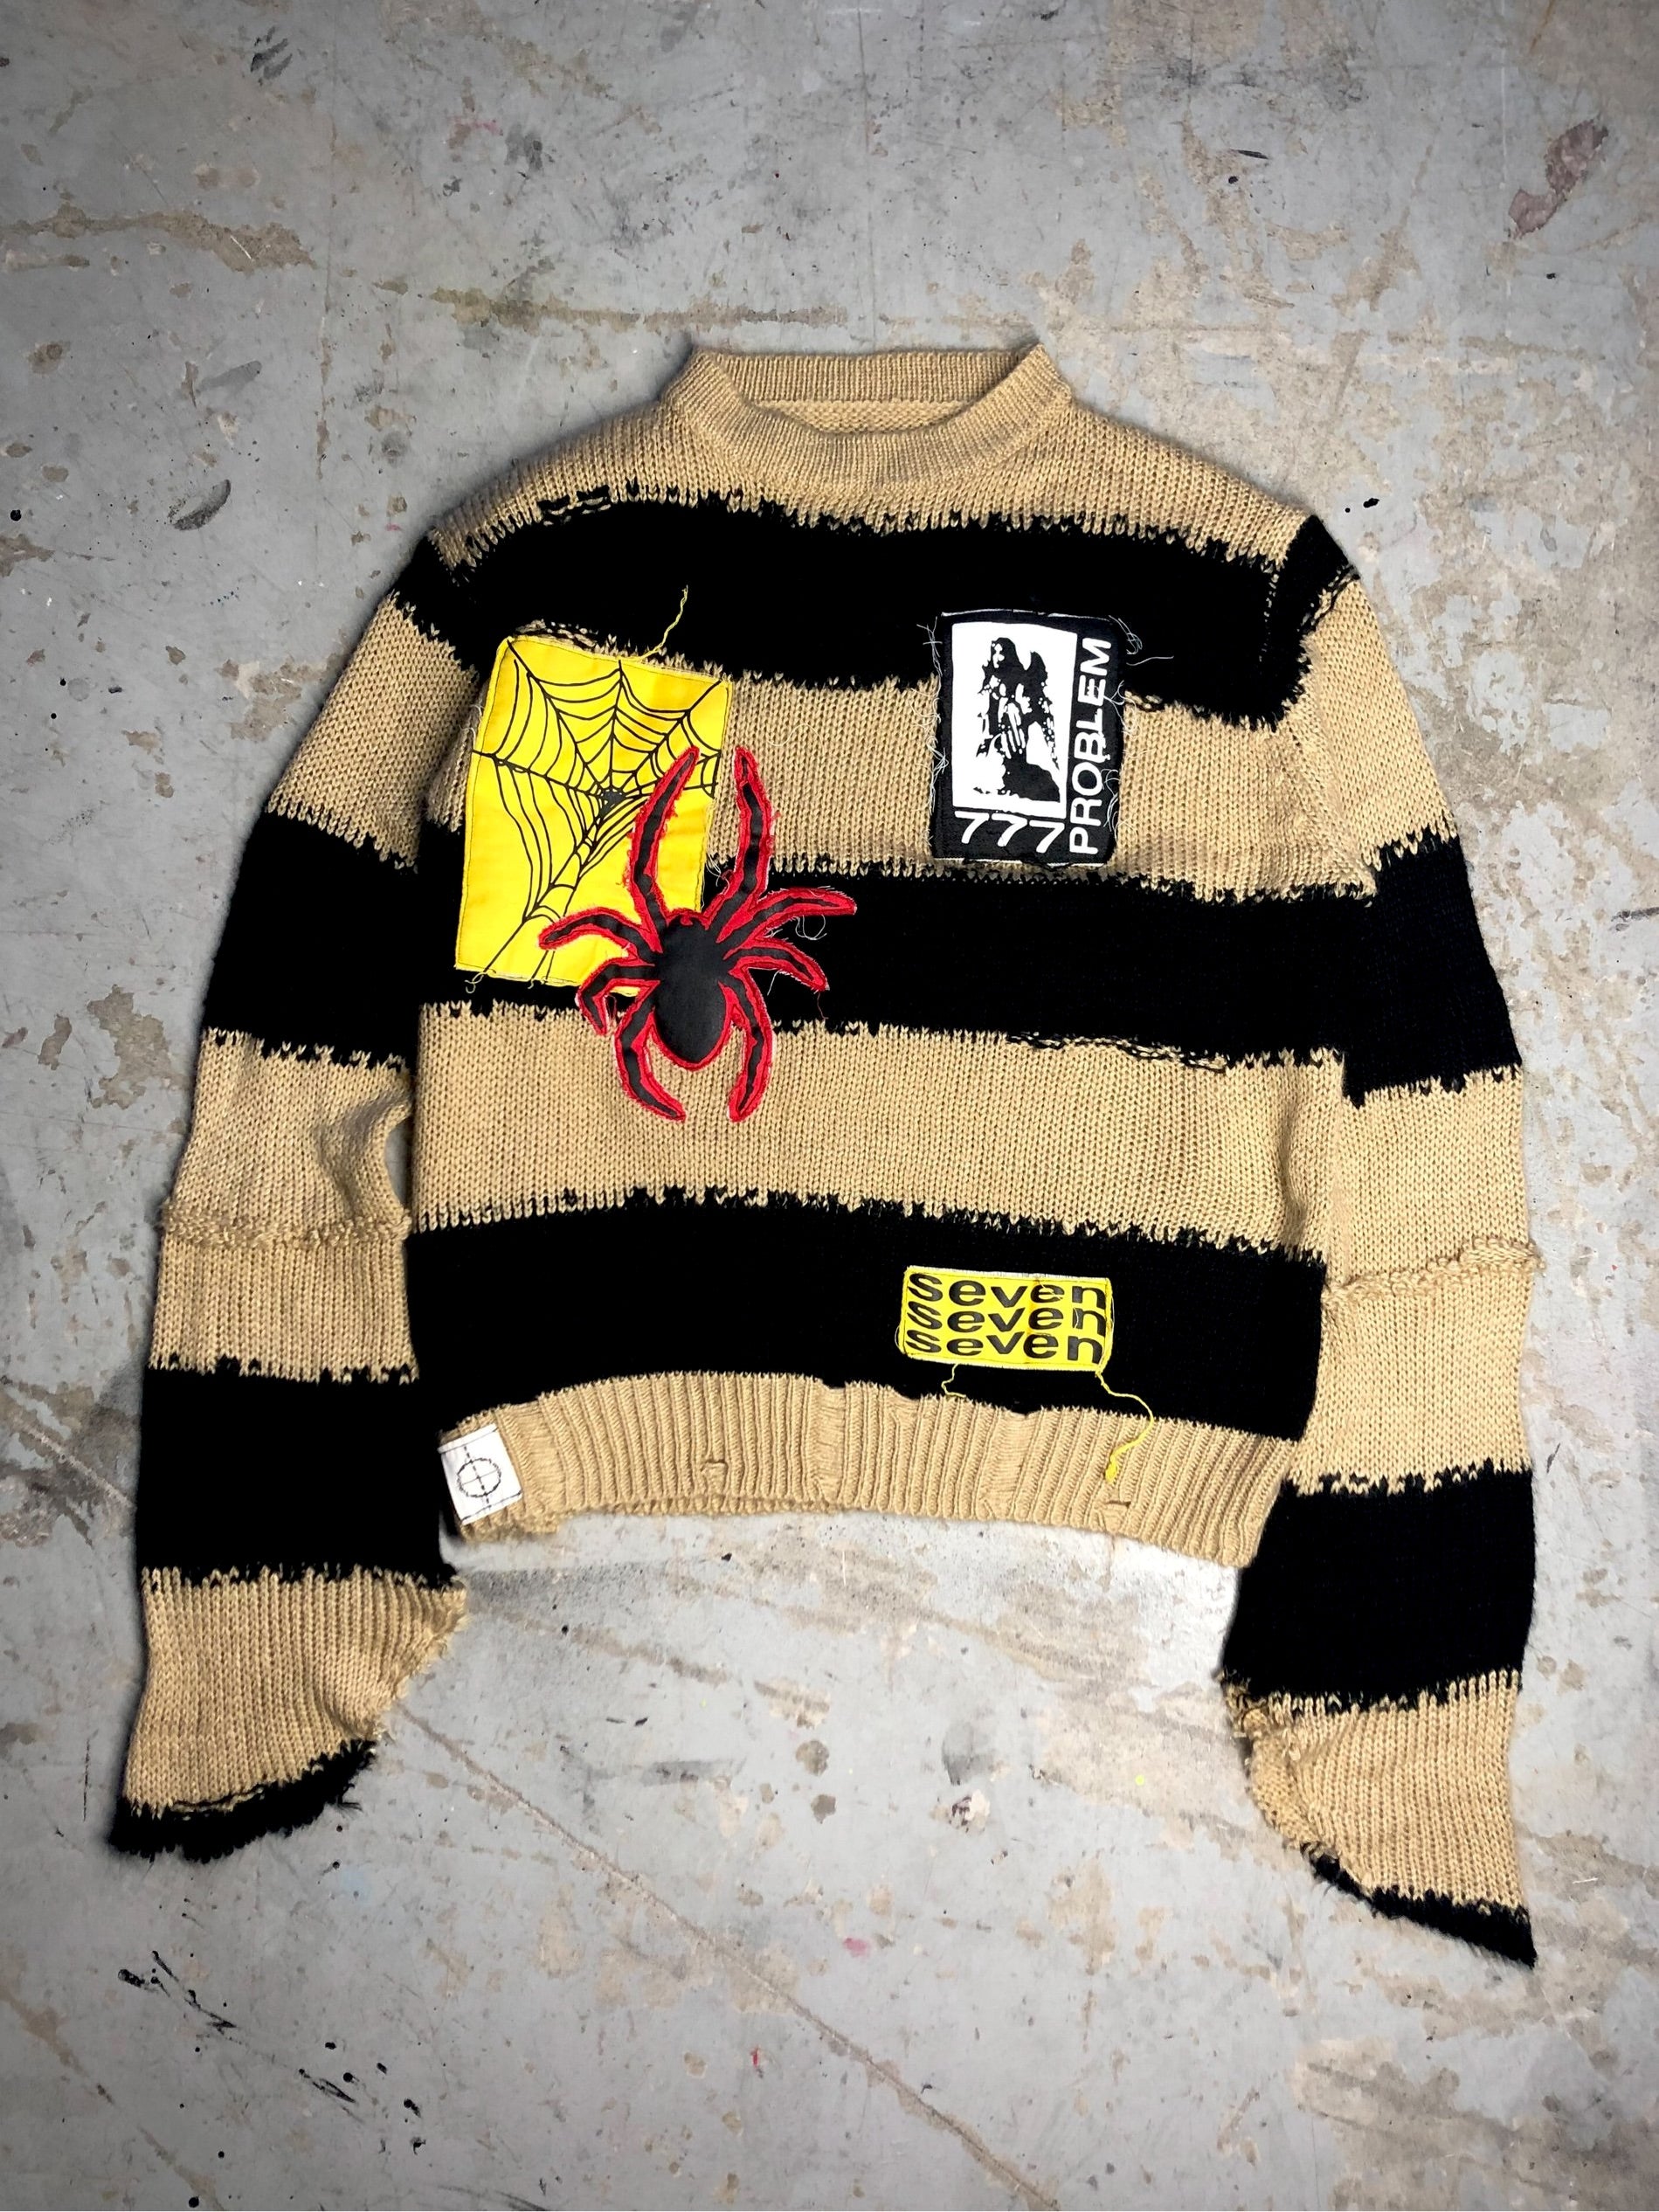 Recluse knit